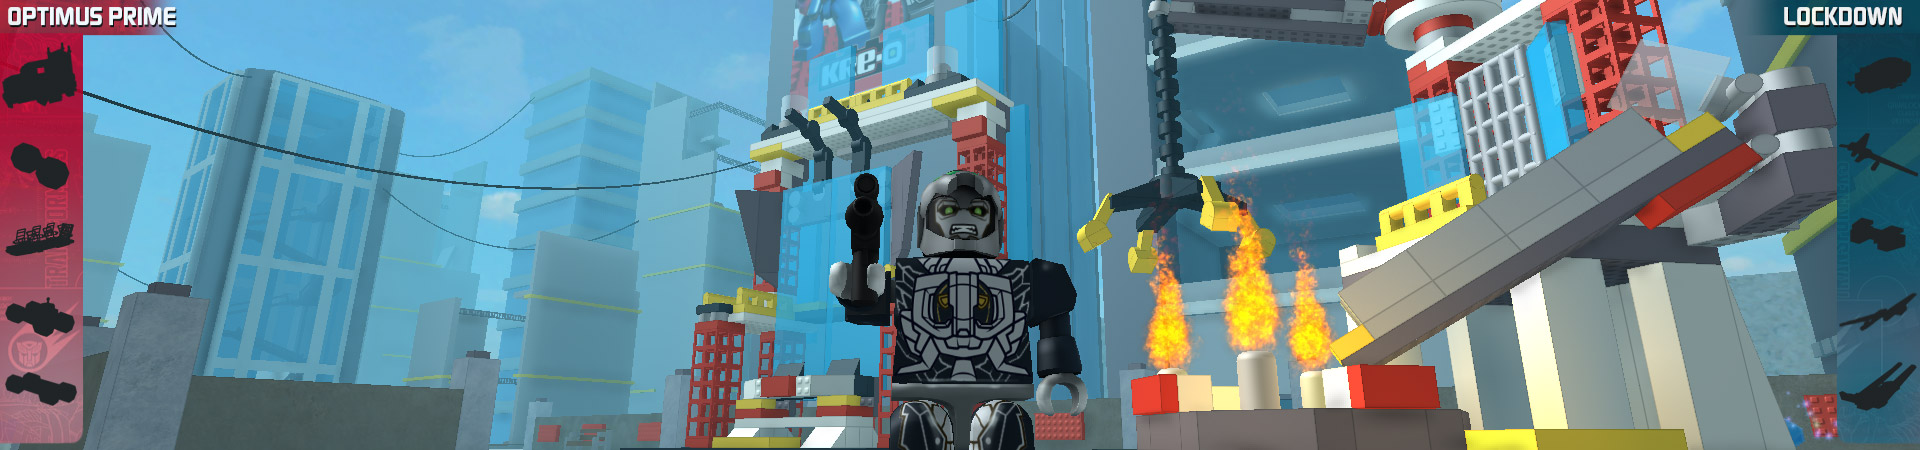 Play As Optimus Prime And Lockdown In Kre O Transformers Today Roblox Blog - roblox transformers games